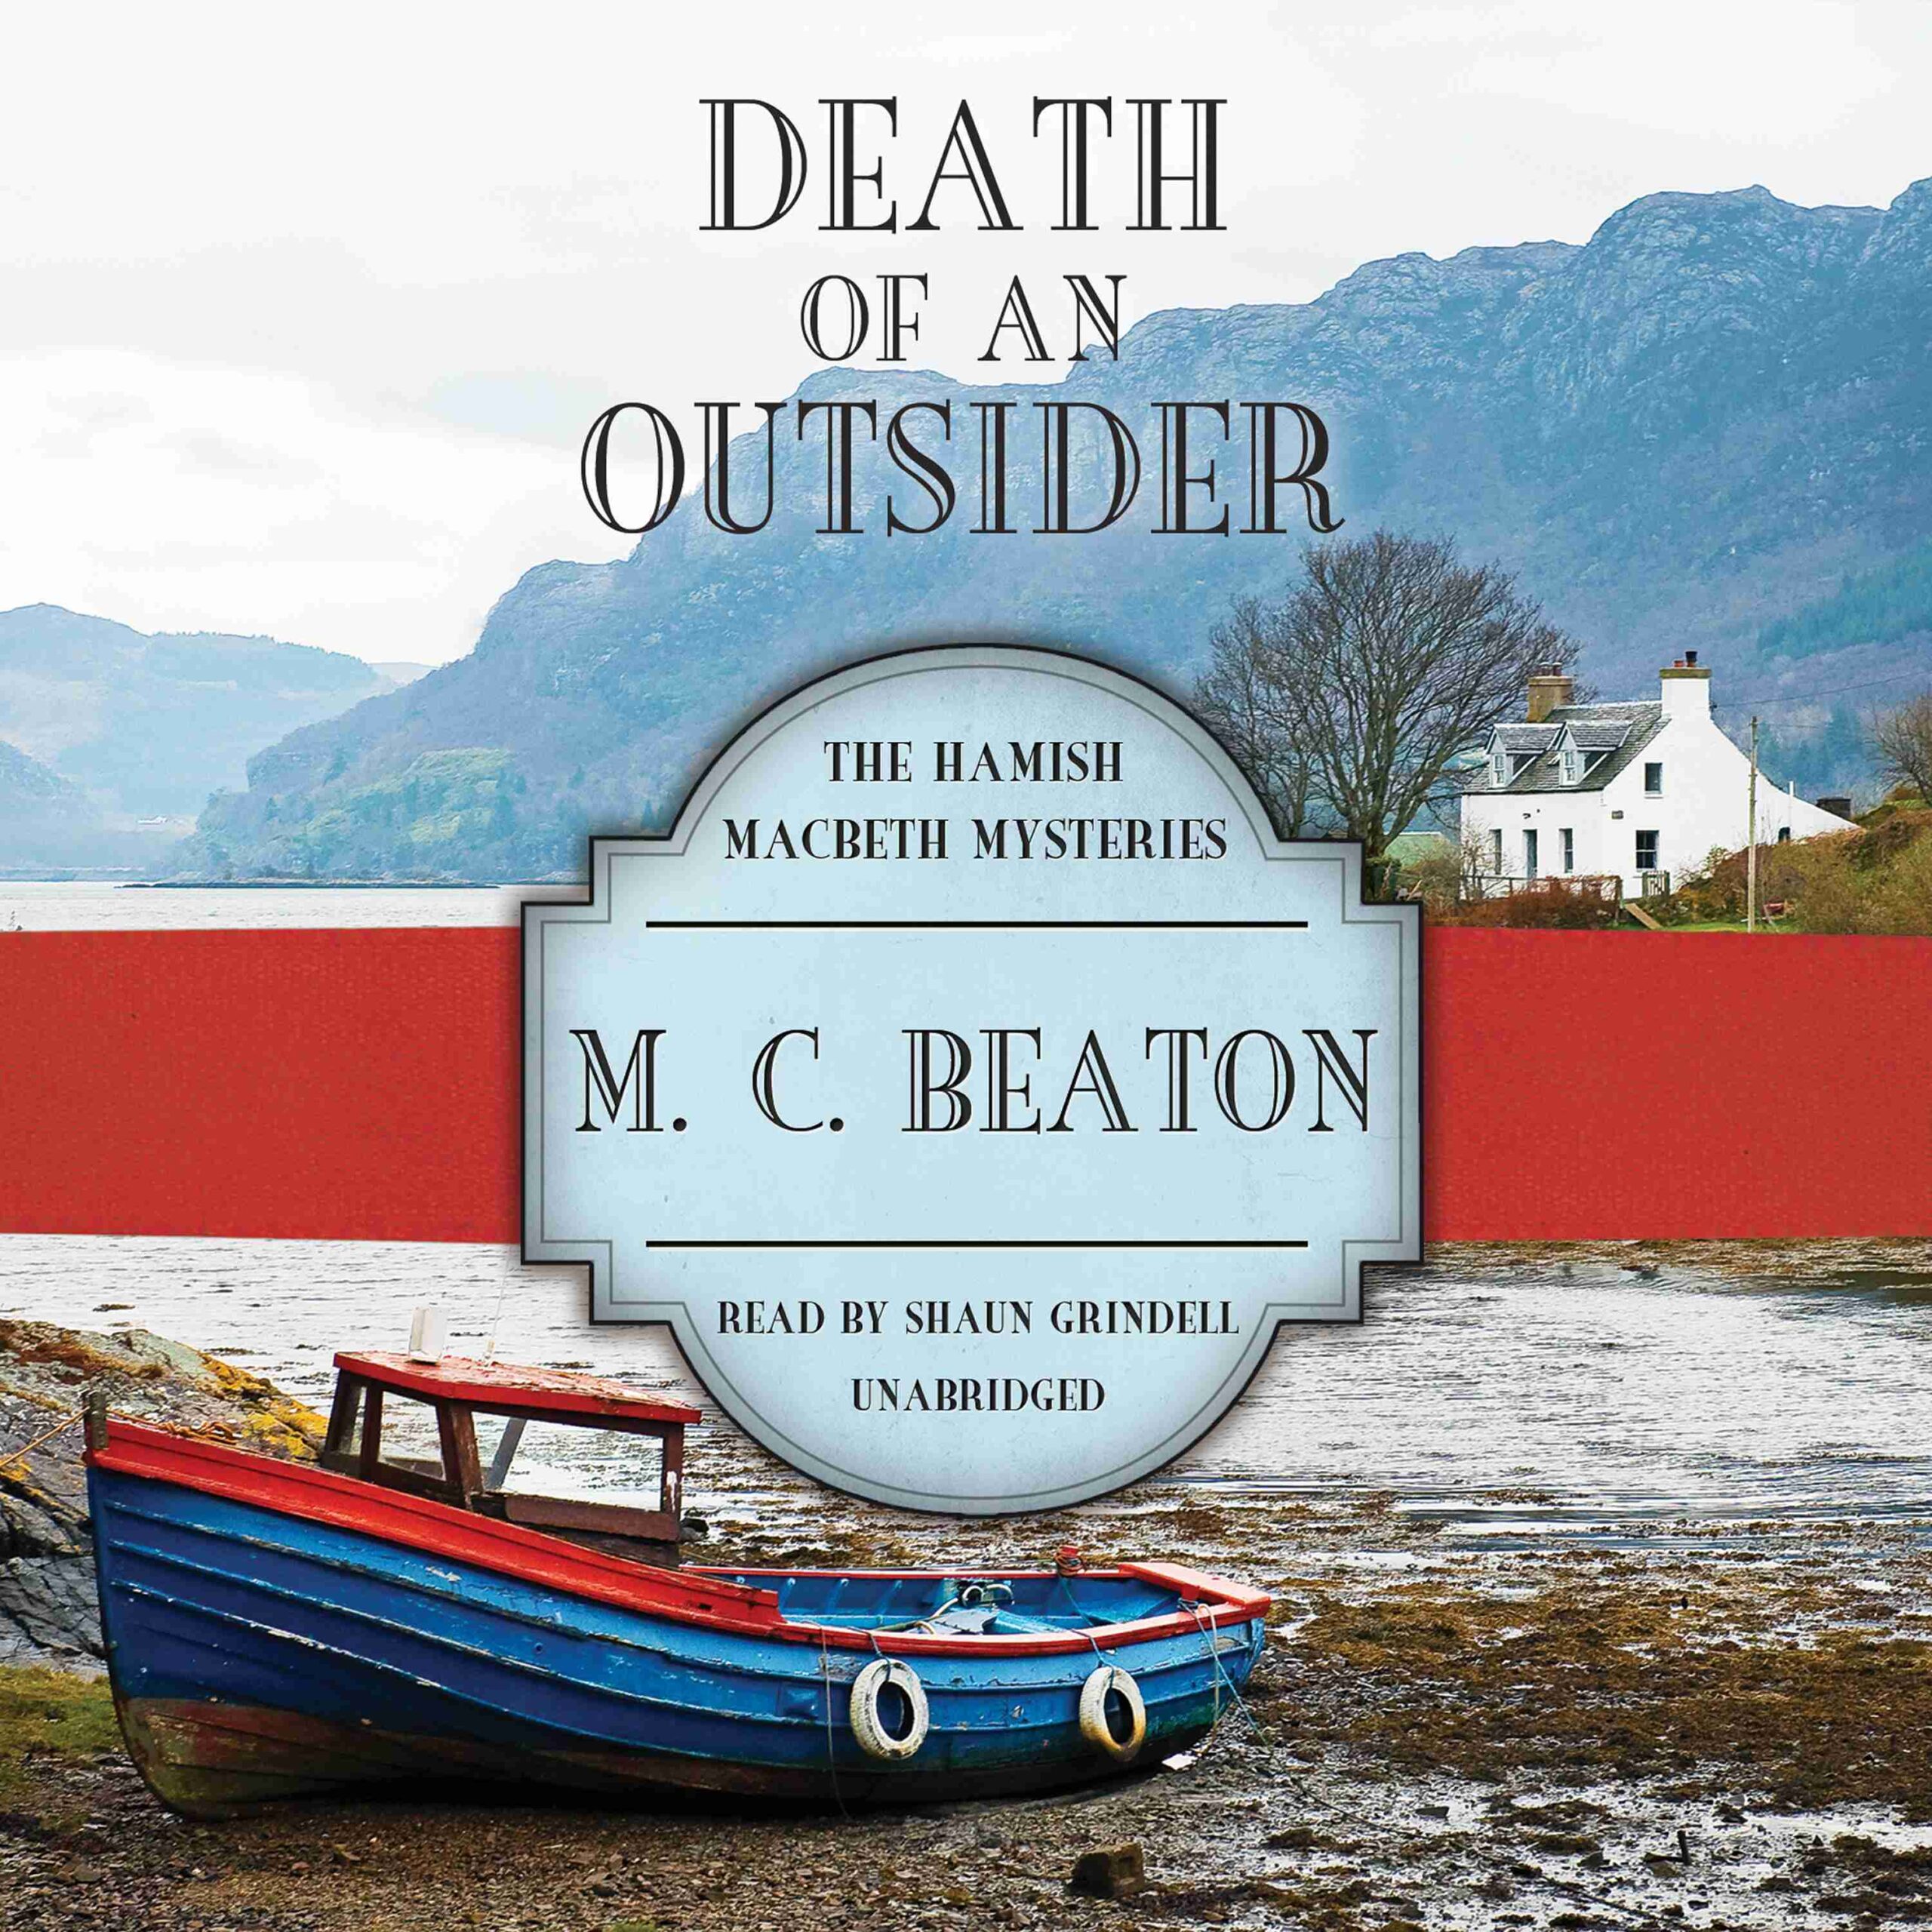 Death of an Outsider byM. C. Beaton Audiobook. 19.95 USD